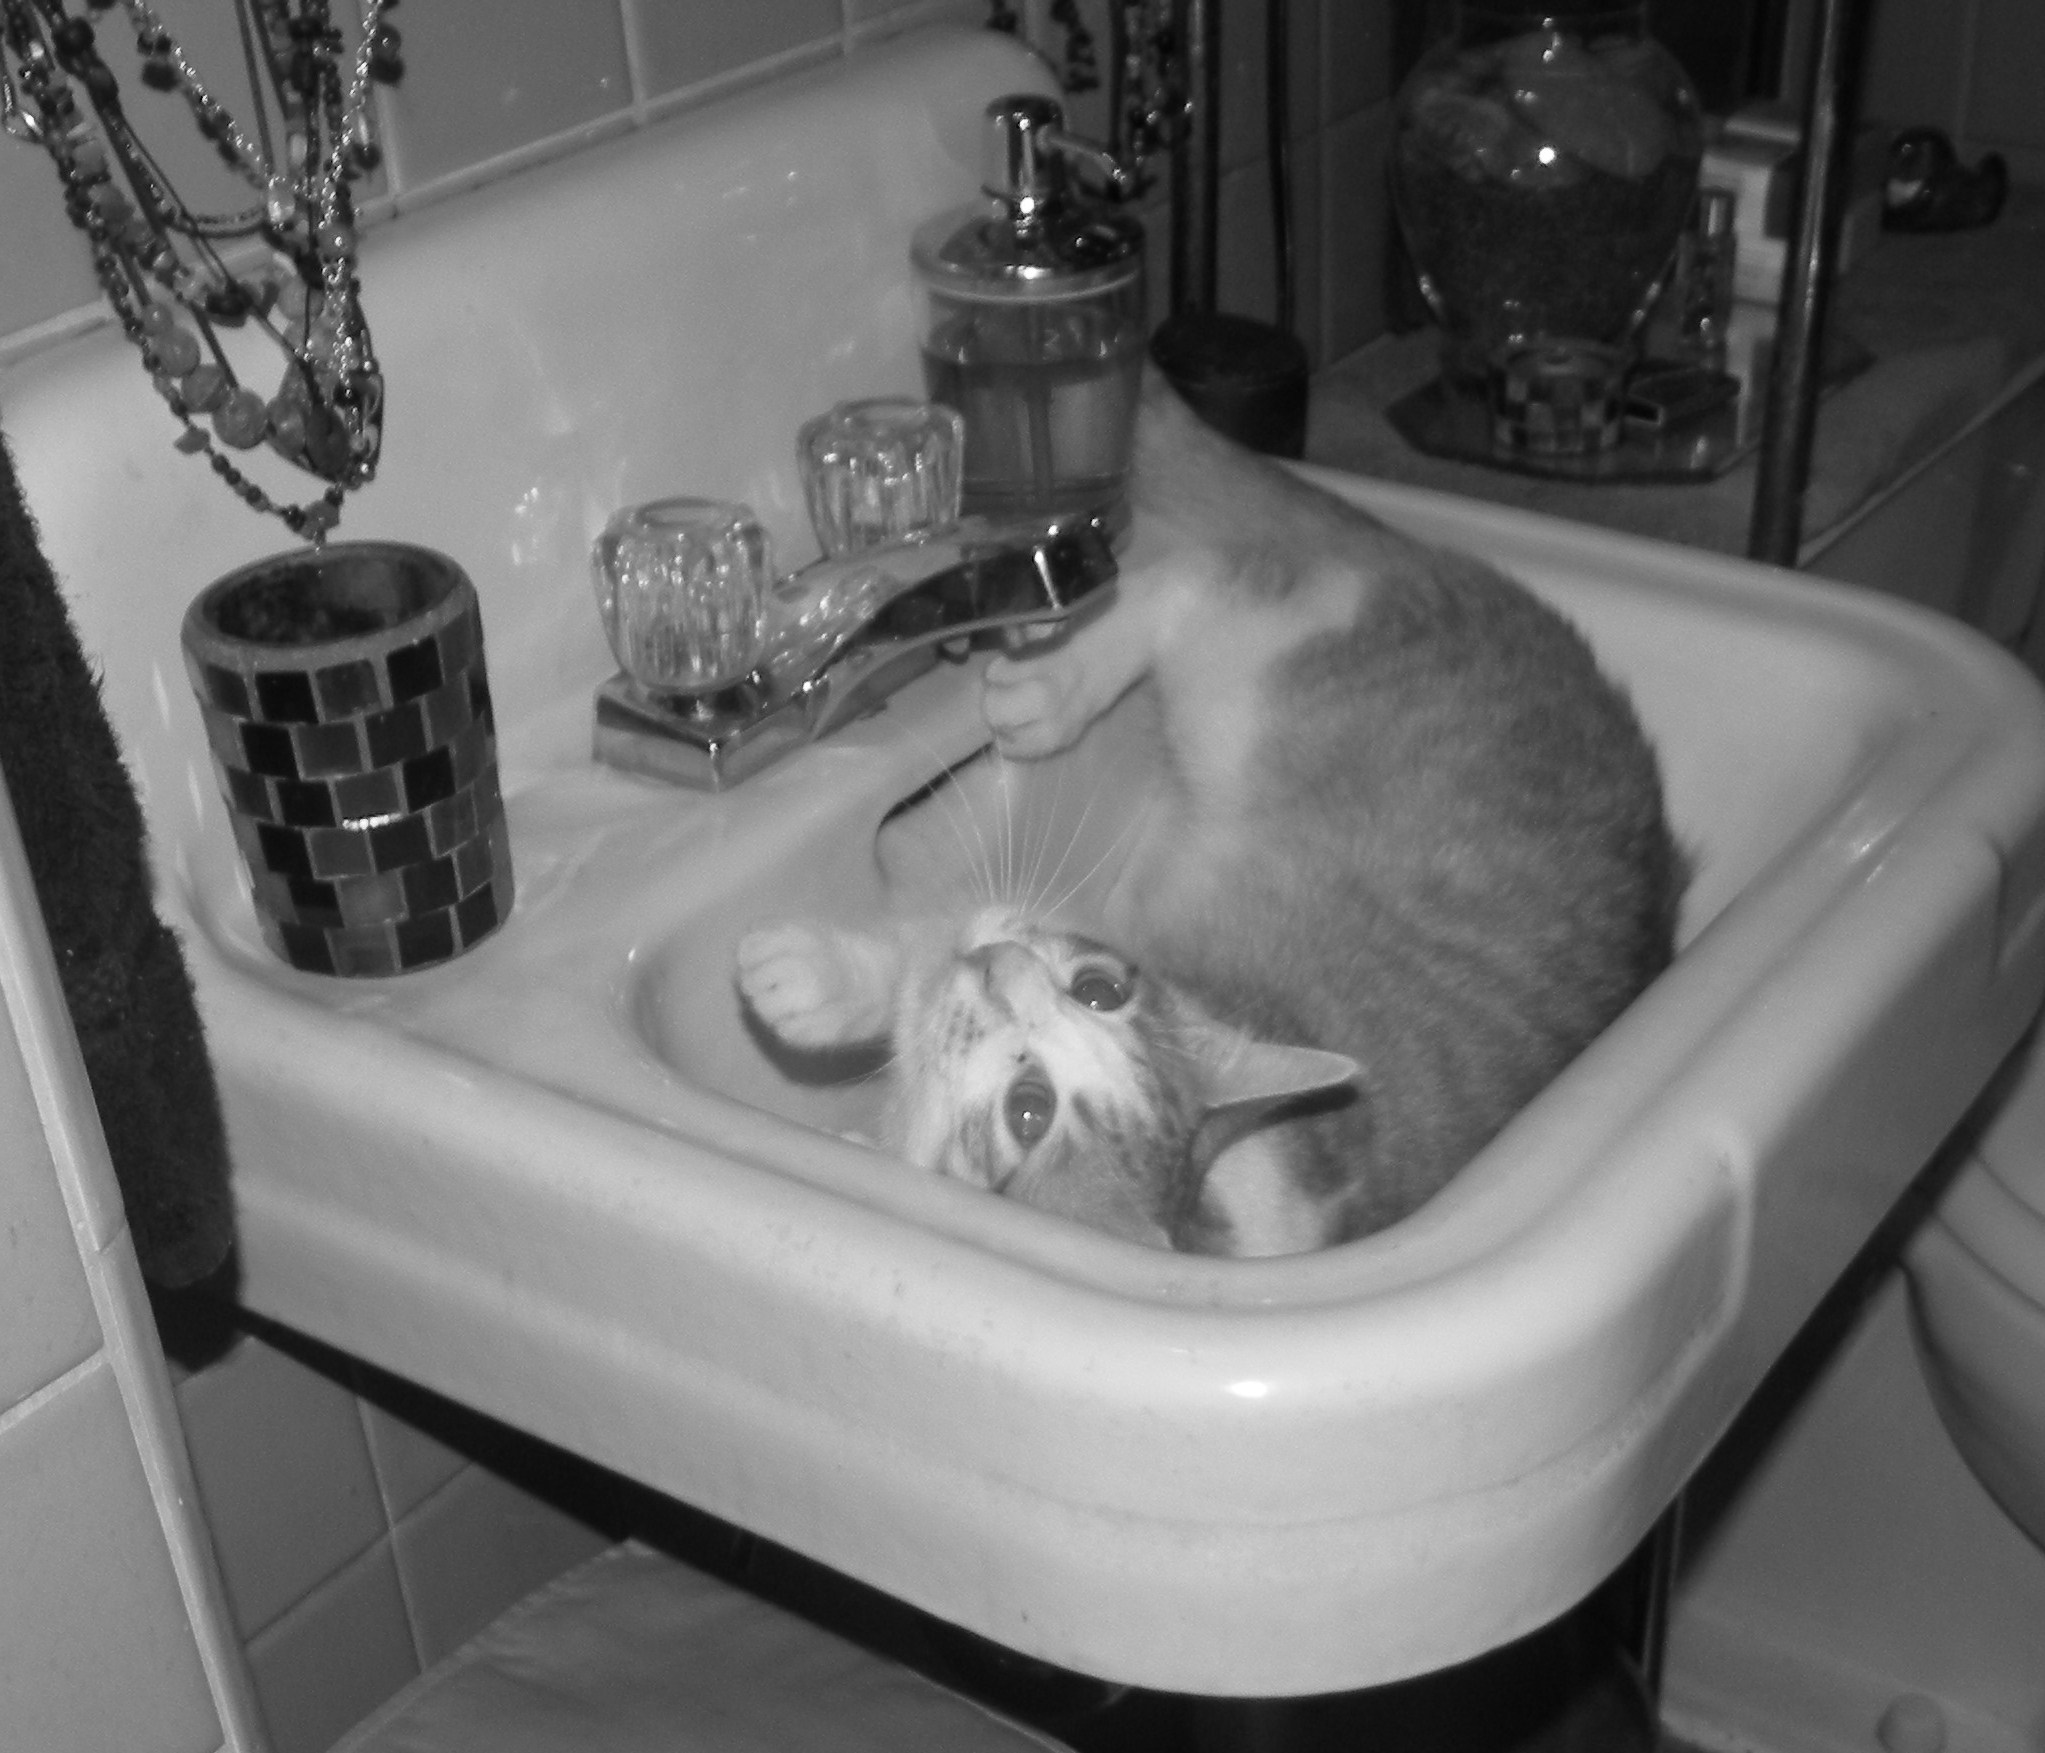 a cat is drinking out of a sink in the bathroom